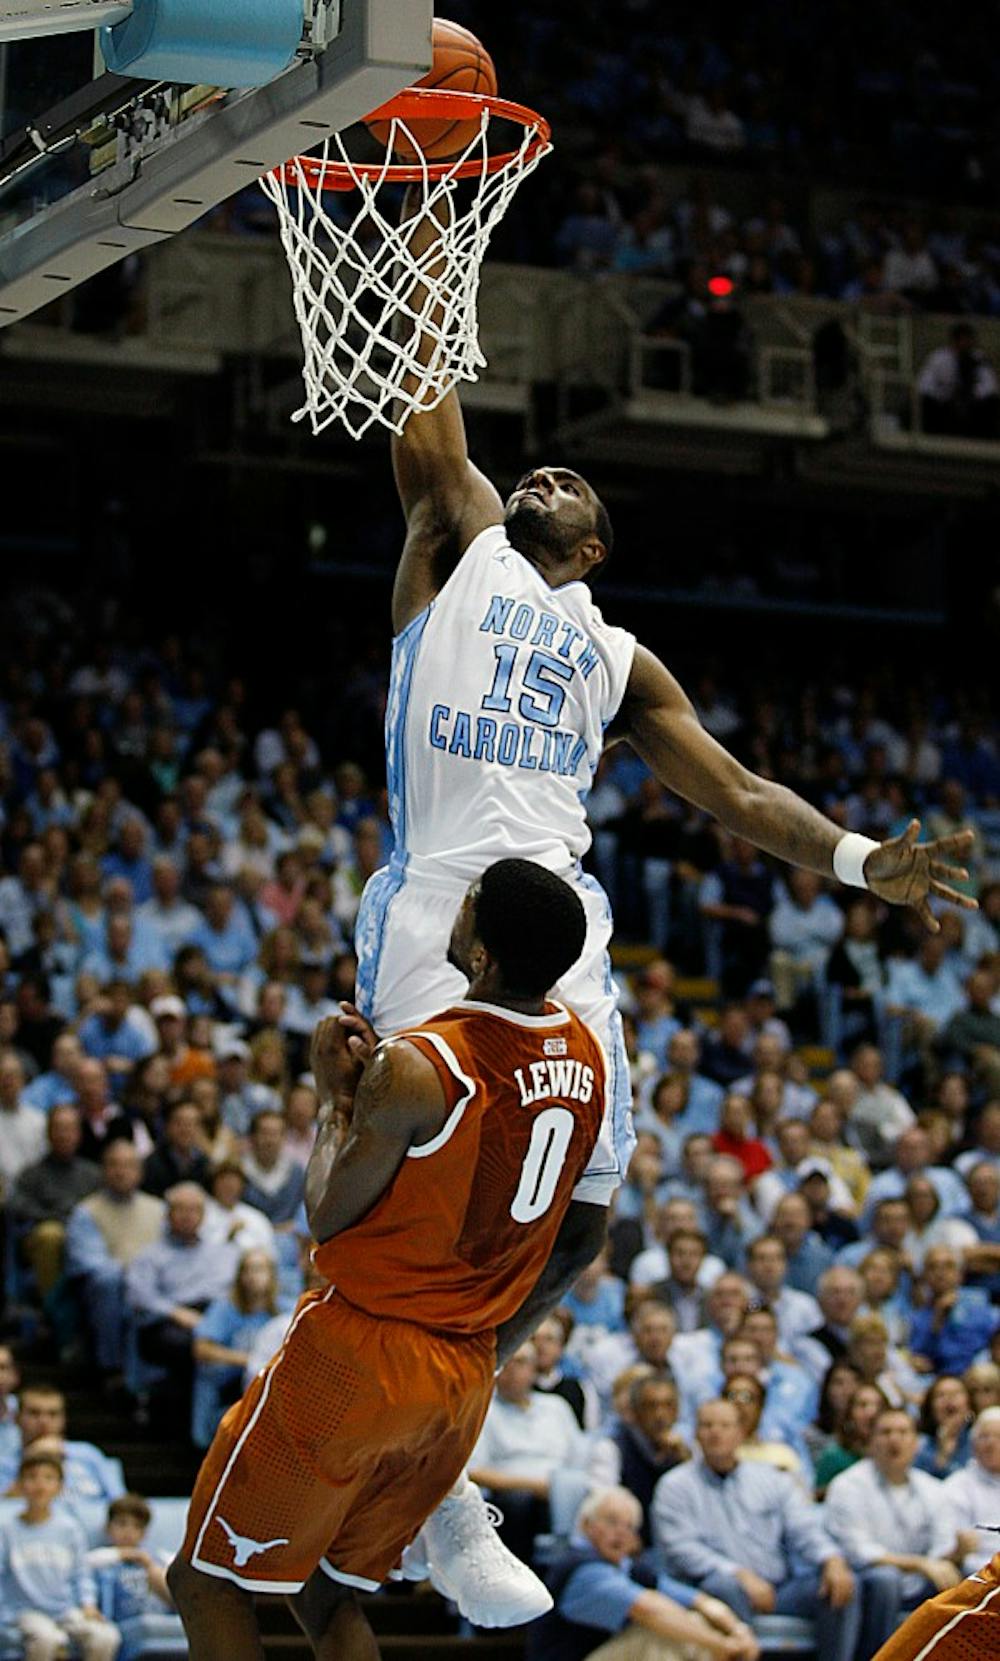 UNC guard P.J. Hairston dunks the ball over Texas guard Julien Lewis during the game Wednesday at the Dean E. Smith Center. Hairston had 5 points in the Tar Heels 82-63 win over Texas.